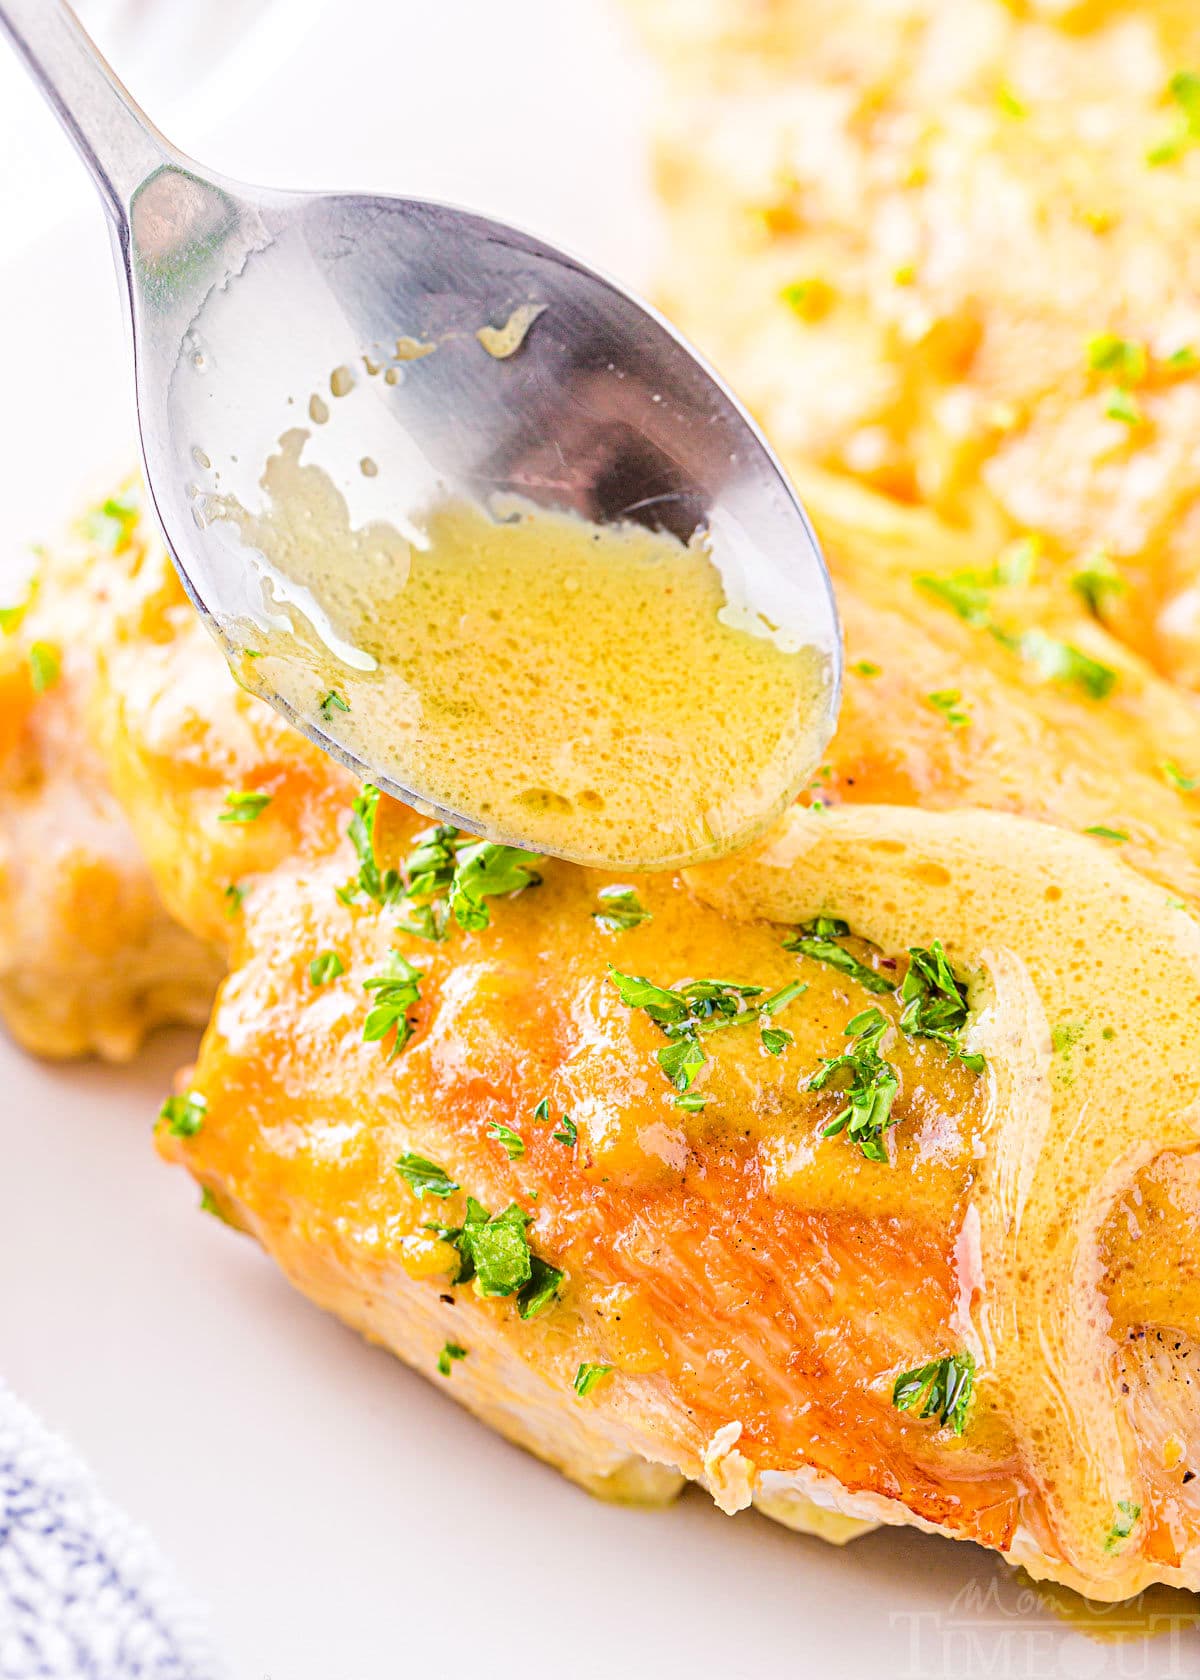 honey mustard sauce being drizzled on baked chicken breast.